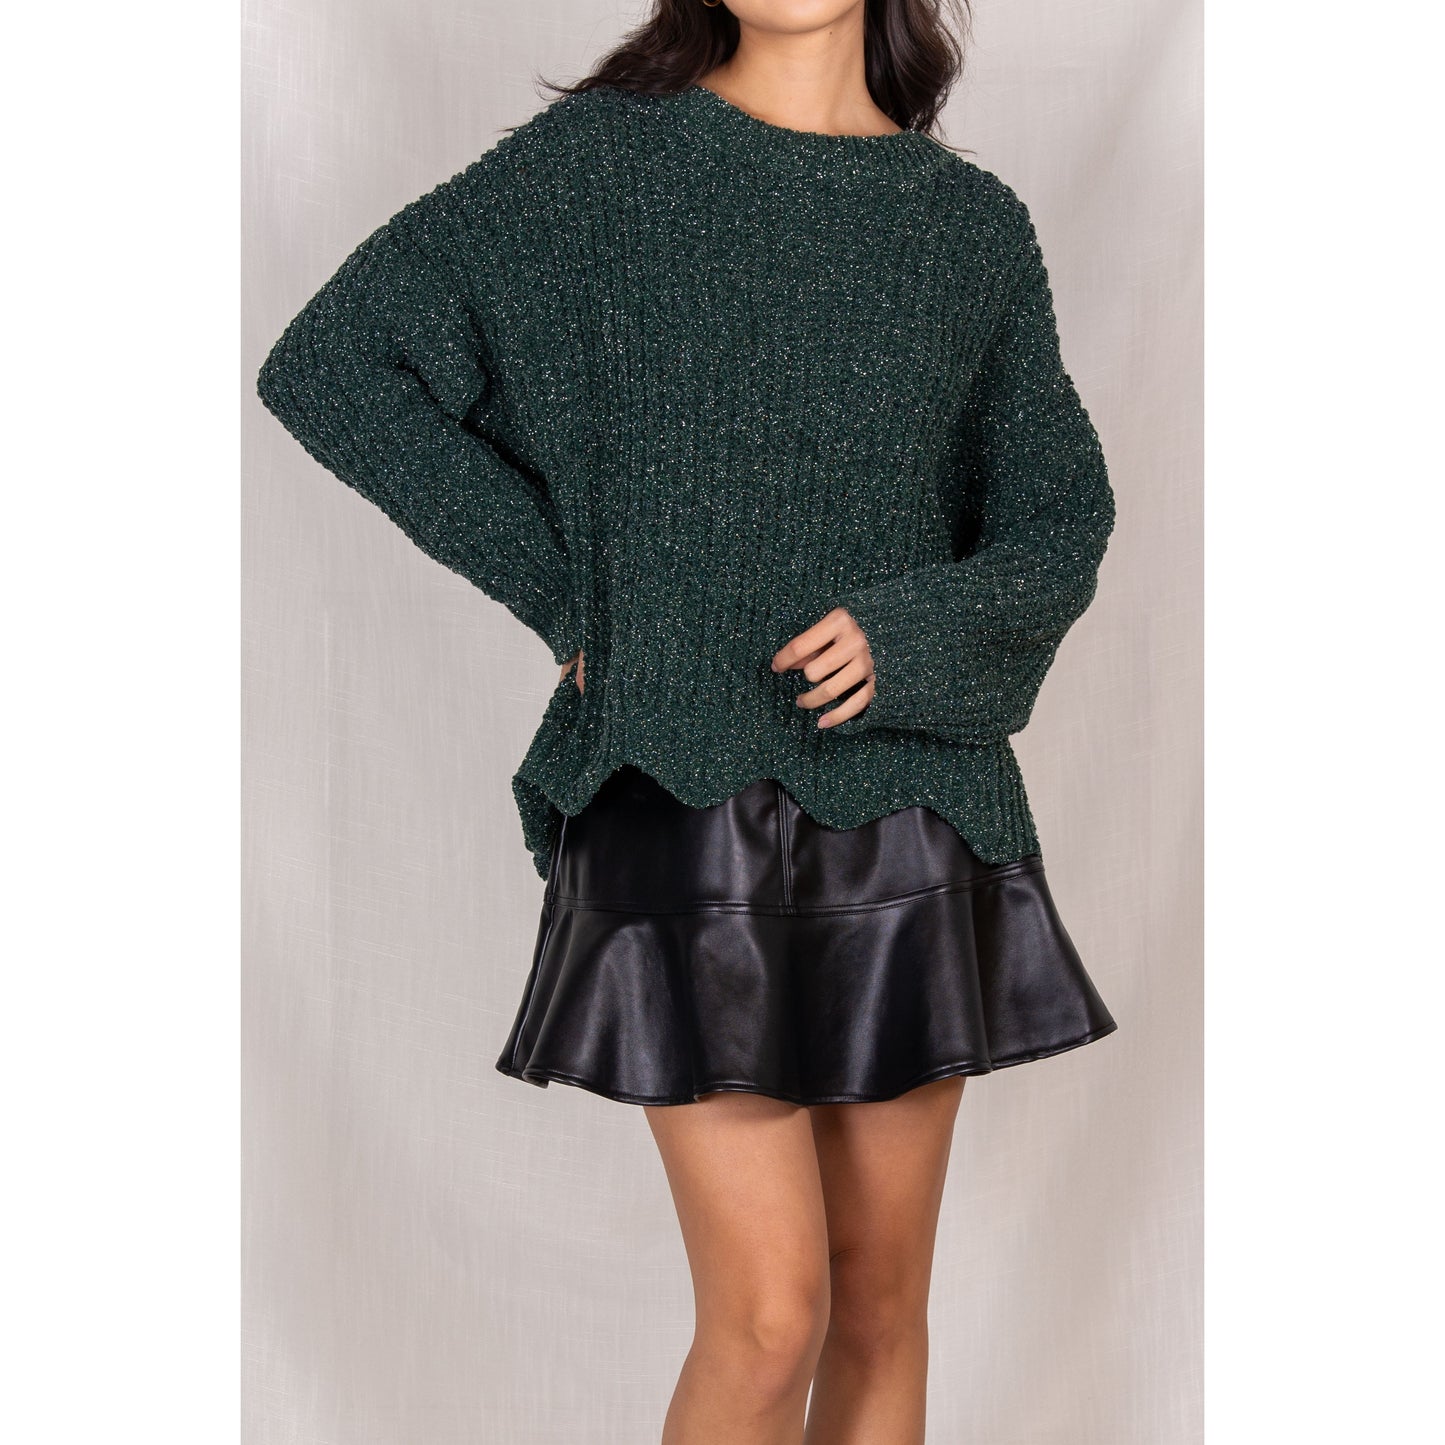 Before You - Shimmer Knit Scalloped Hem Sweater - Emerald